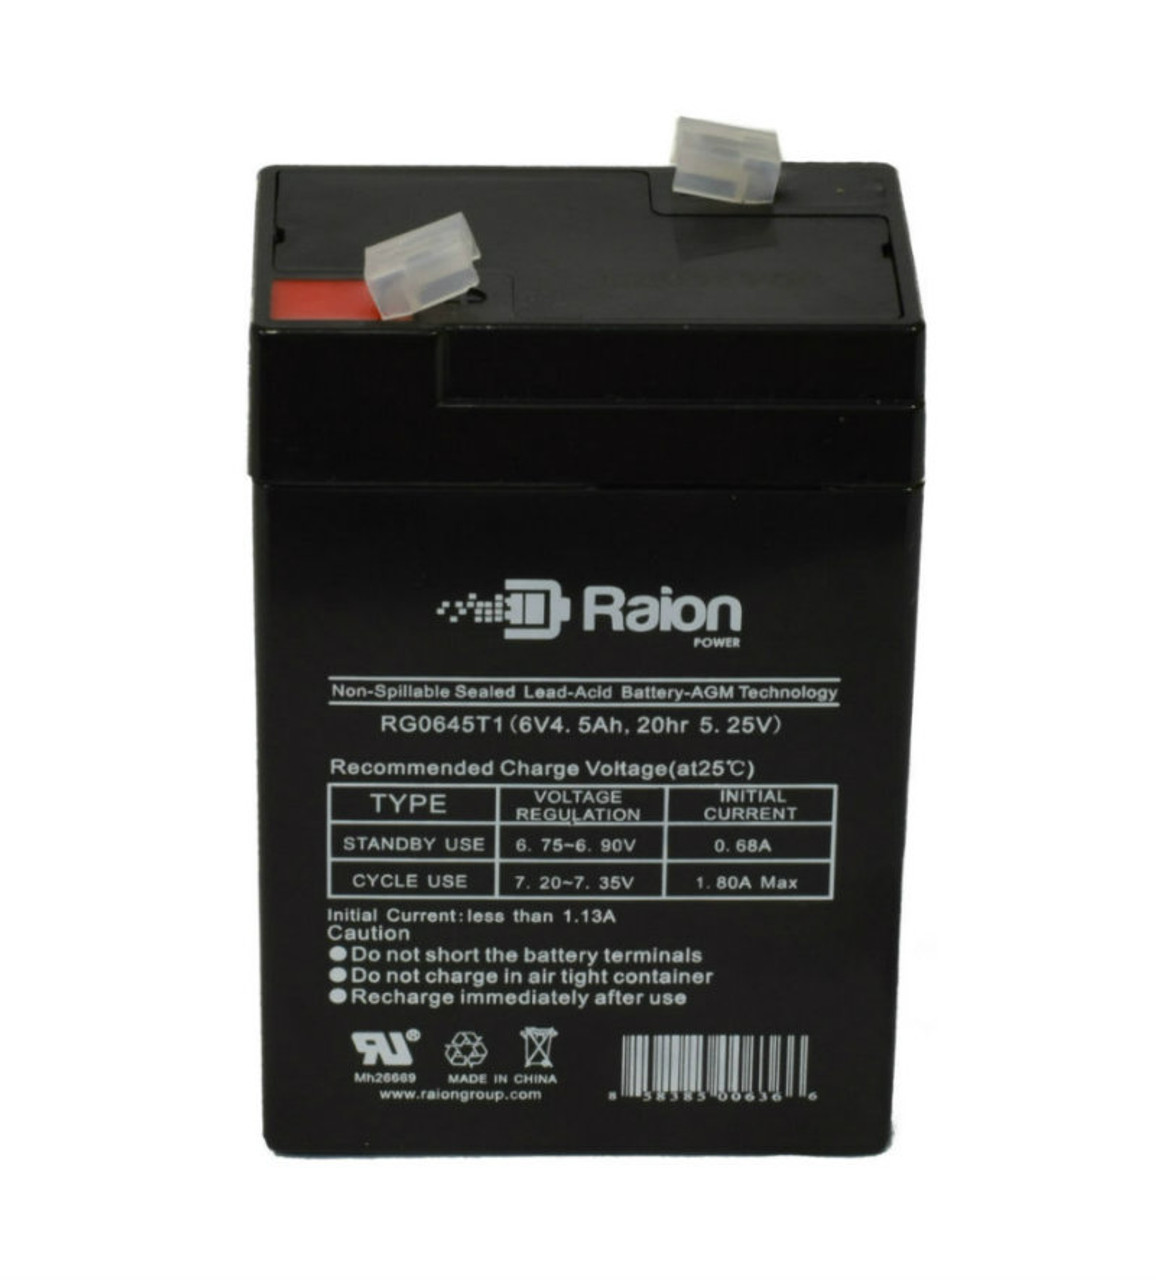 Raion Power RG0645T1 Replacement Battery Cartridge for Peg Perego IGED1172 6V Fiat 500 Star